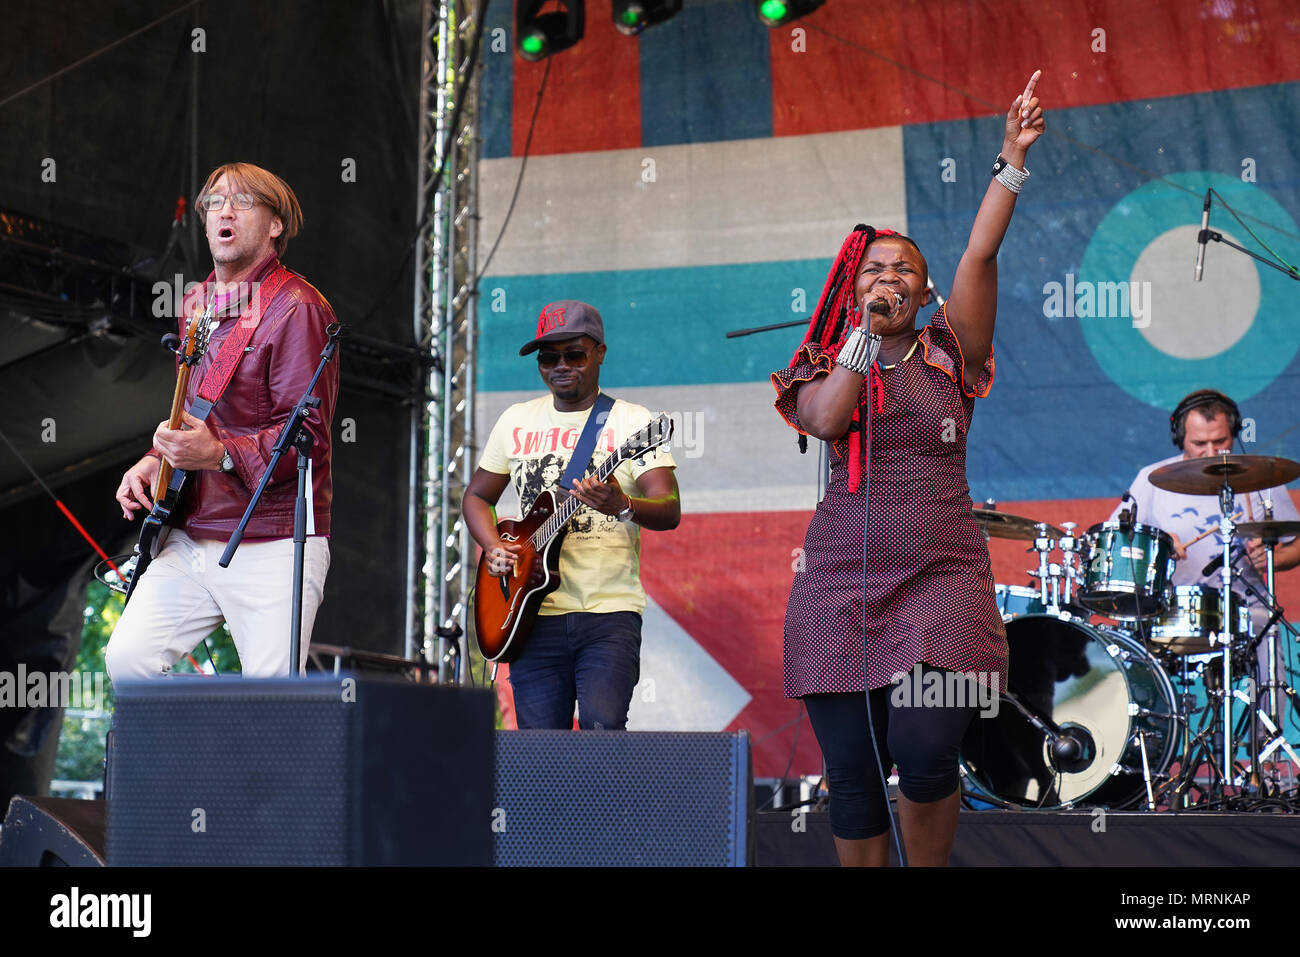 Helsinki, Finland. 26th May, 2017. Freshlyground from South Africa performing on the Savannah Stage at the annual World Village Festival in Kaisaniemi Park in Helsinki, Finland . Credit: Mikko Palonkorpi/Alamy Live News. Stock Photo